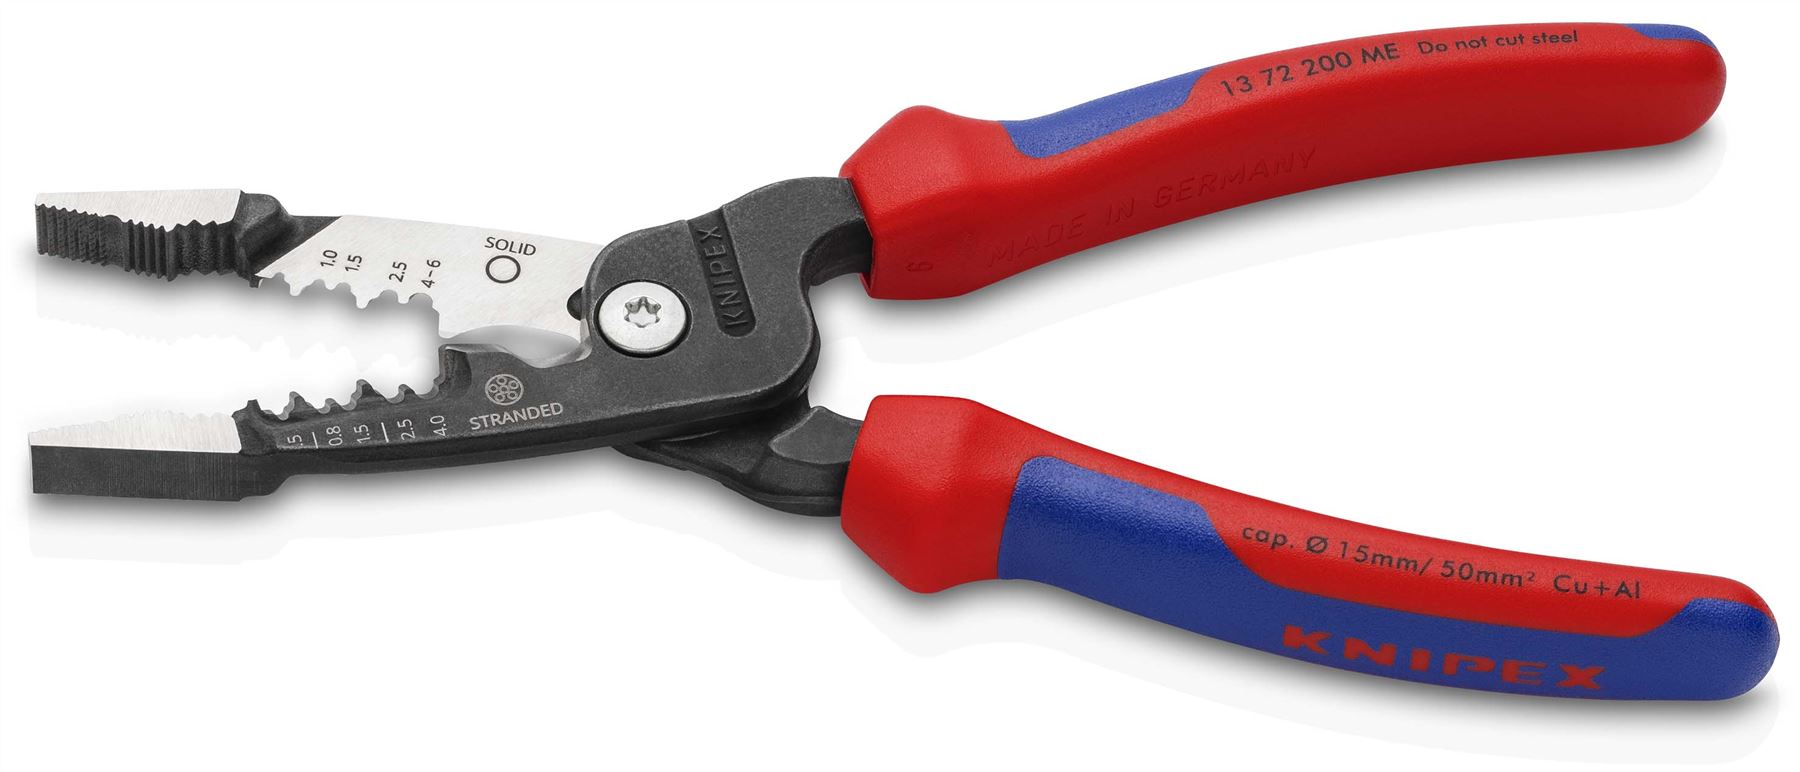 Knipex 1392200 Electrical Installation Pliers Cutting Pliers  Multifunctional Plier For Stripping and Crimping Wire